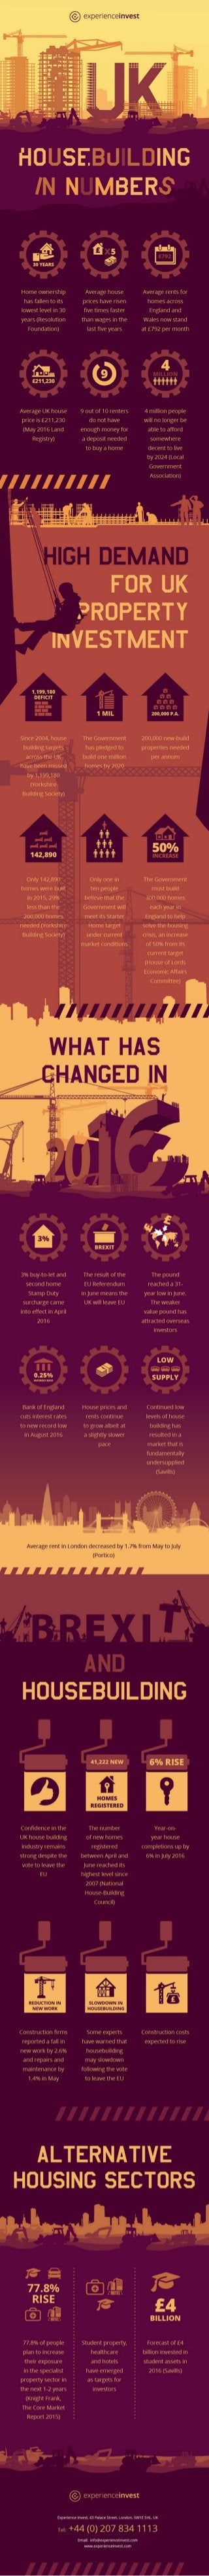 Infographic UK Housebuilding in Numbers